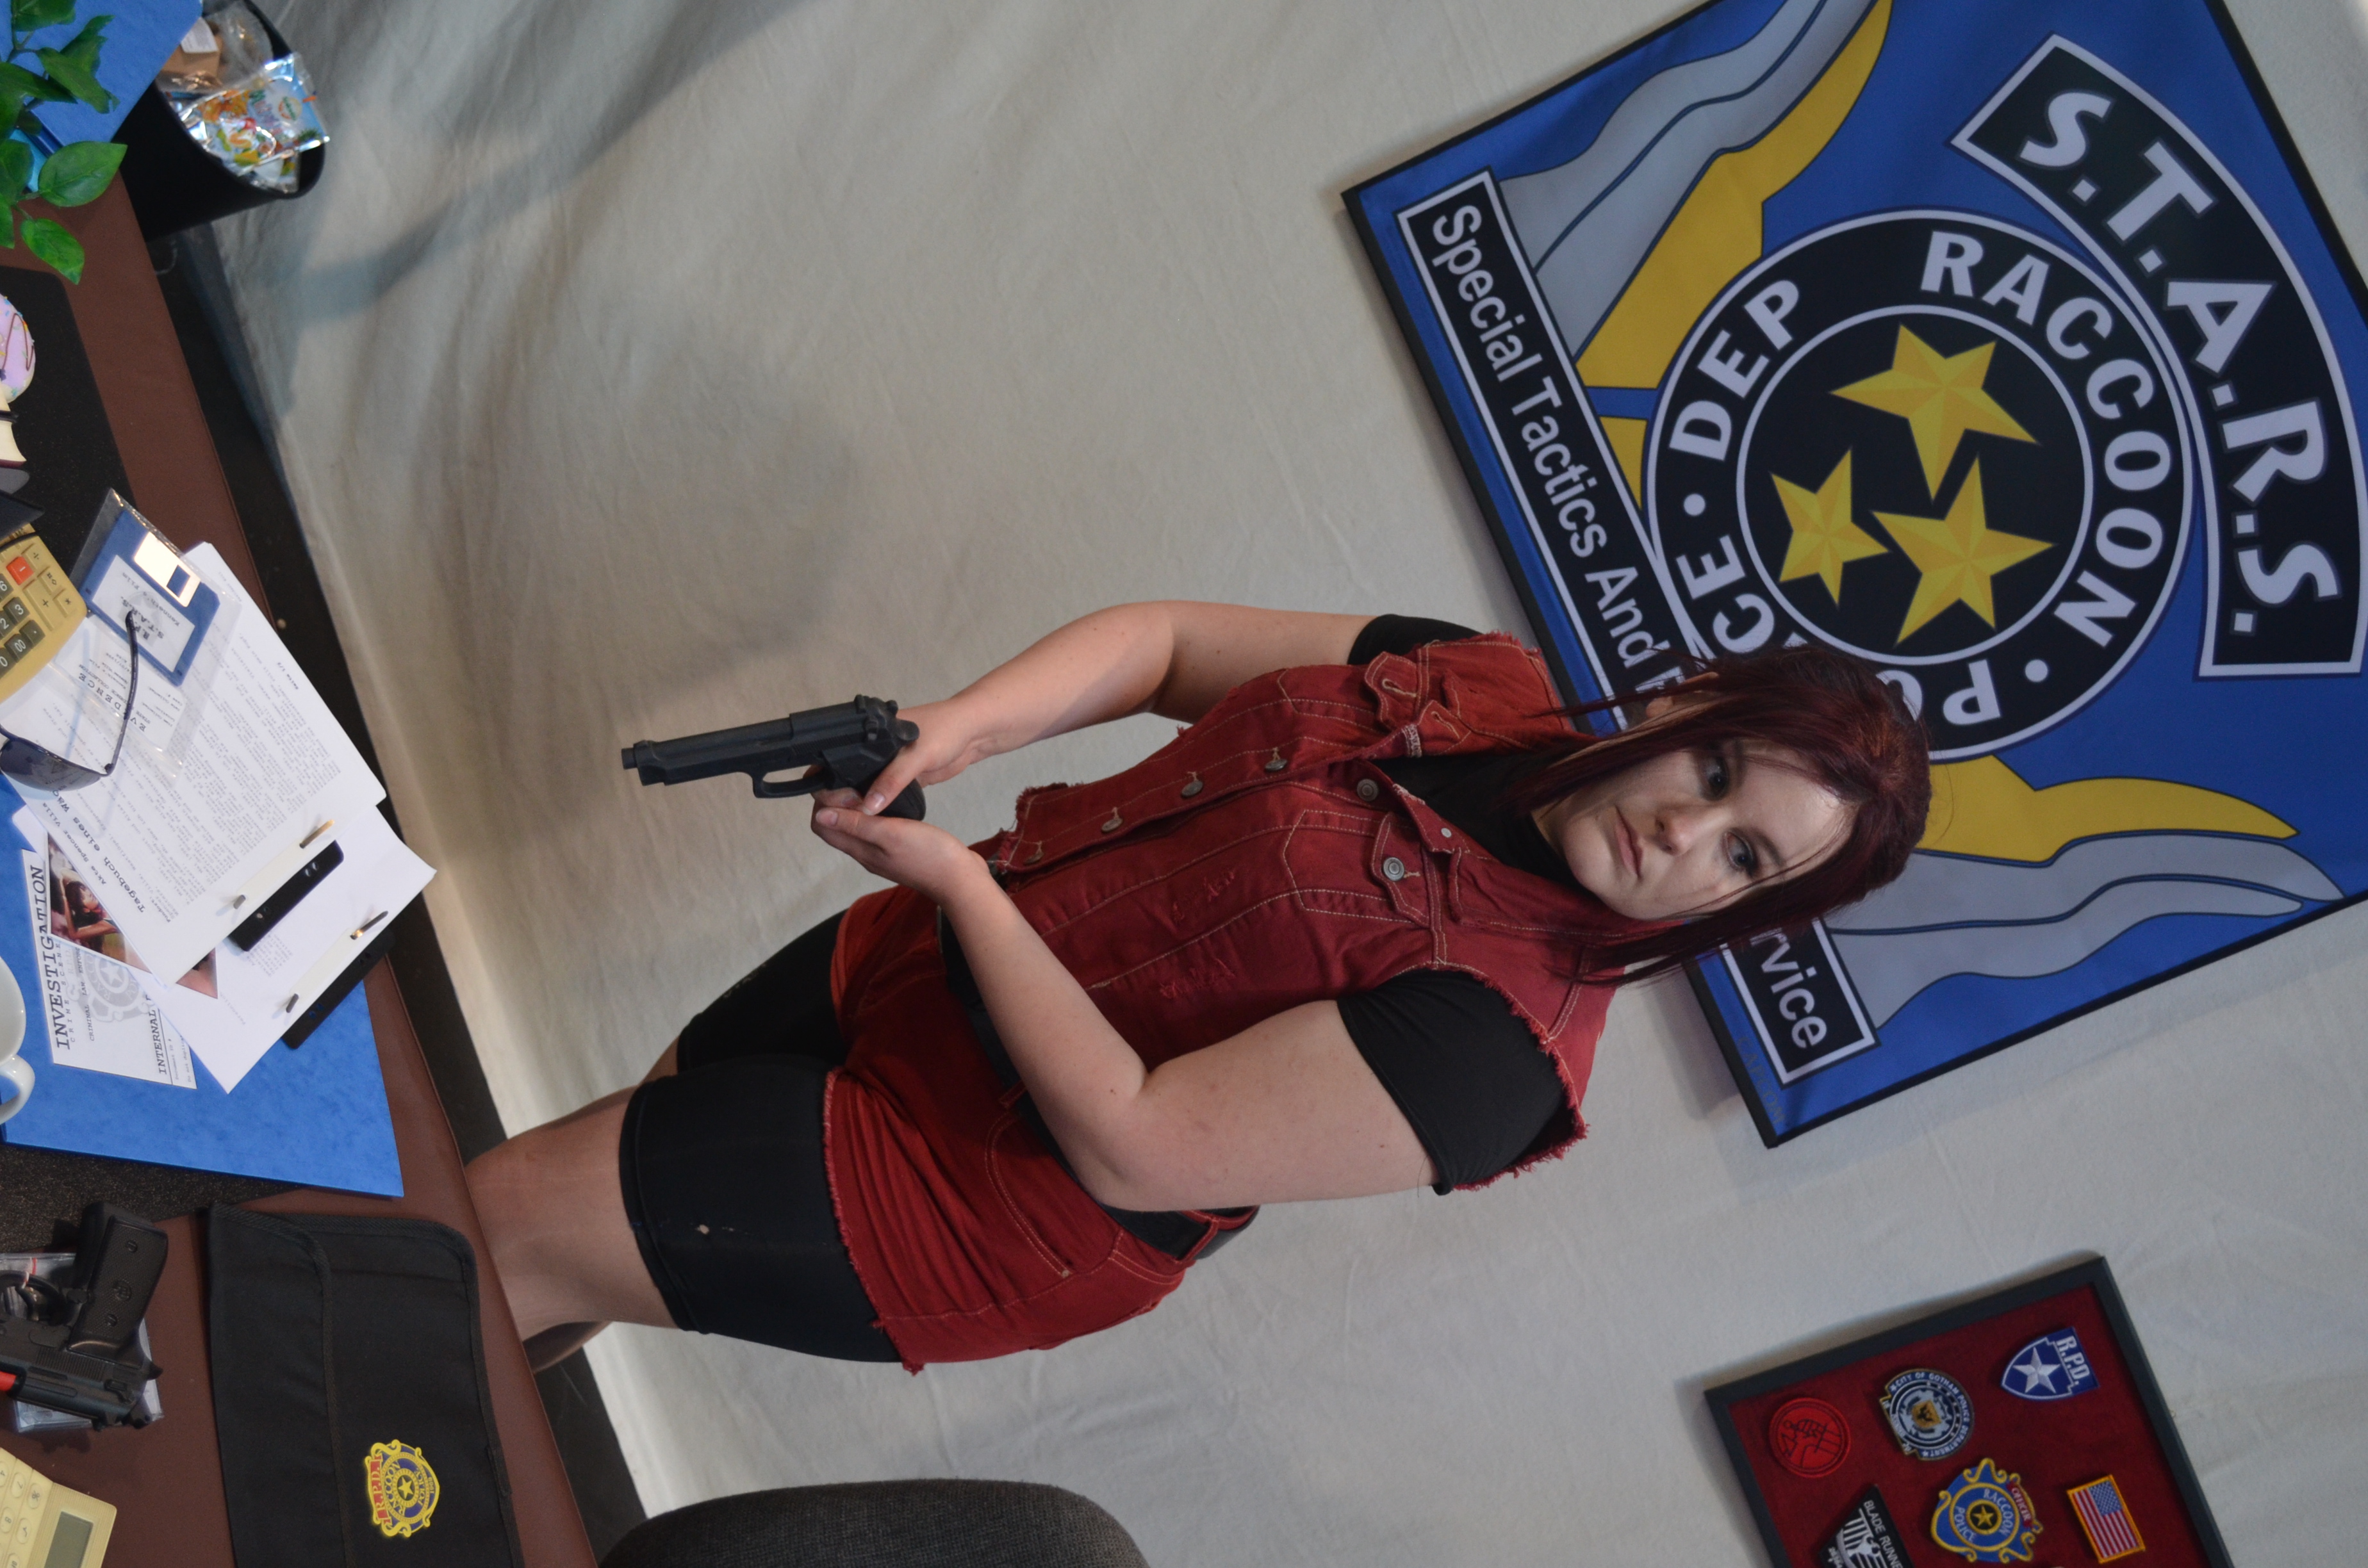 Keks – Claire Redfield Re 2 – Resident Evil